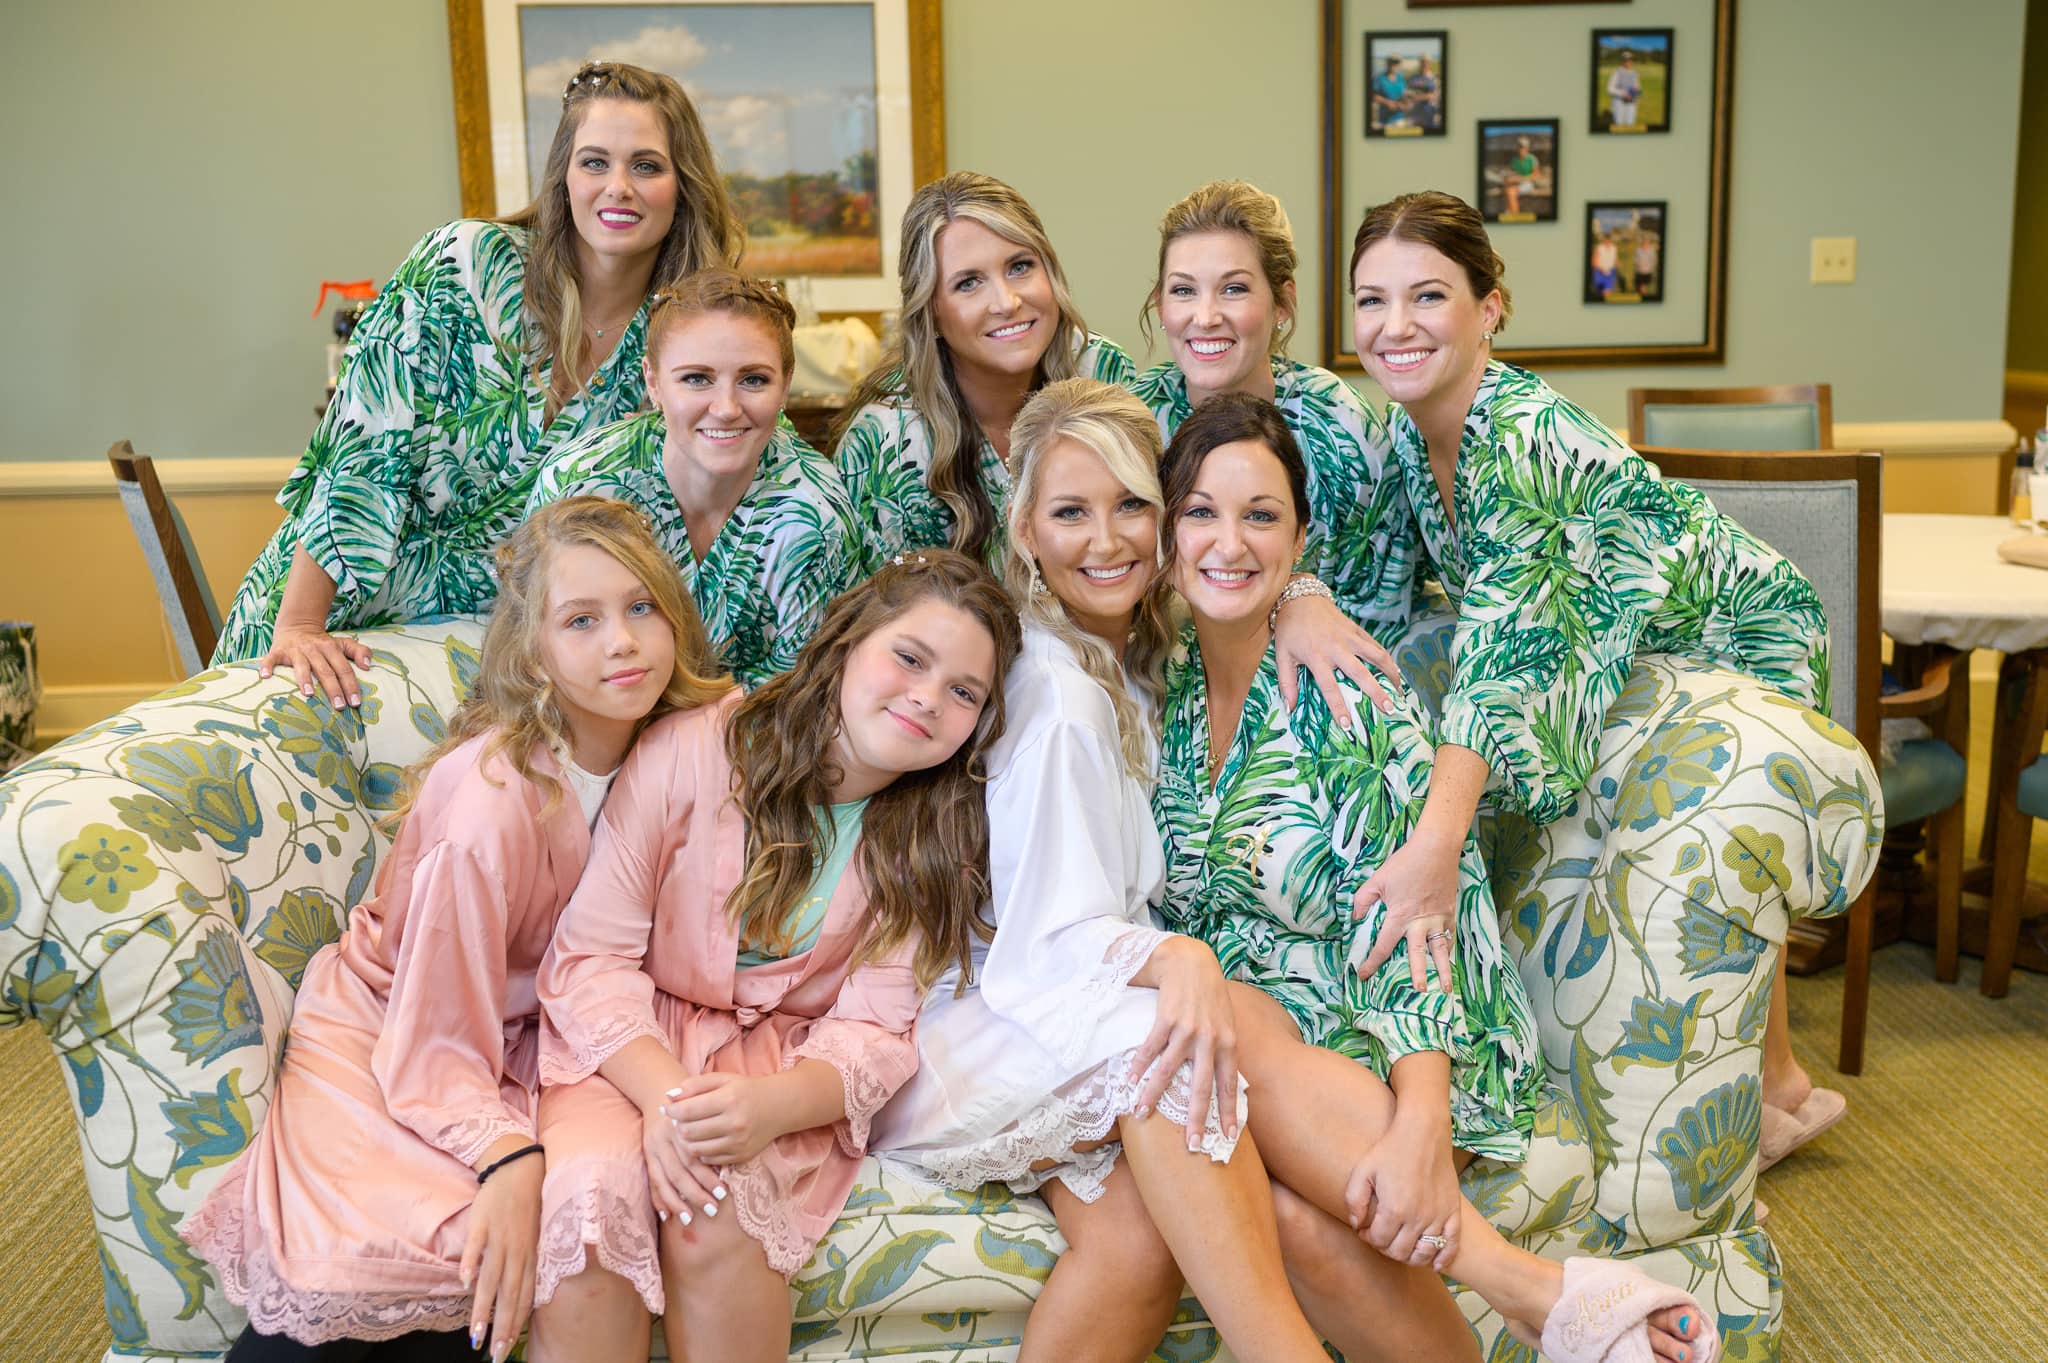 Bride and bridesmaids on the couch - Dunes Golf and Beach Club